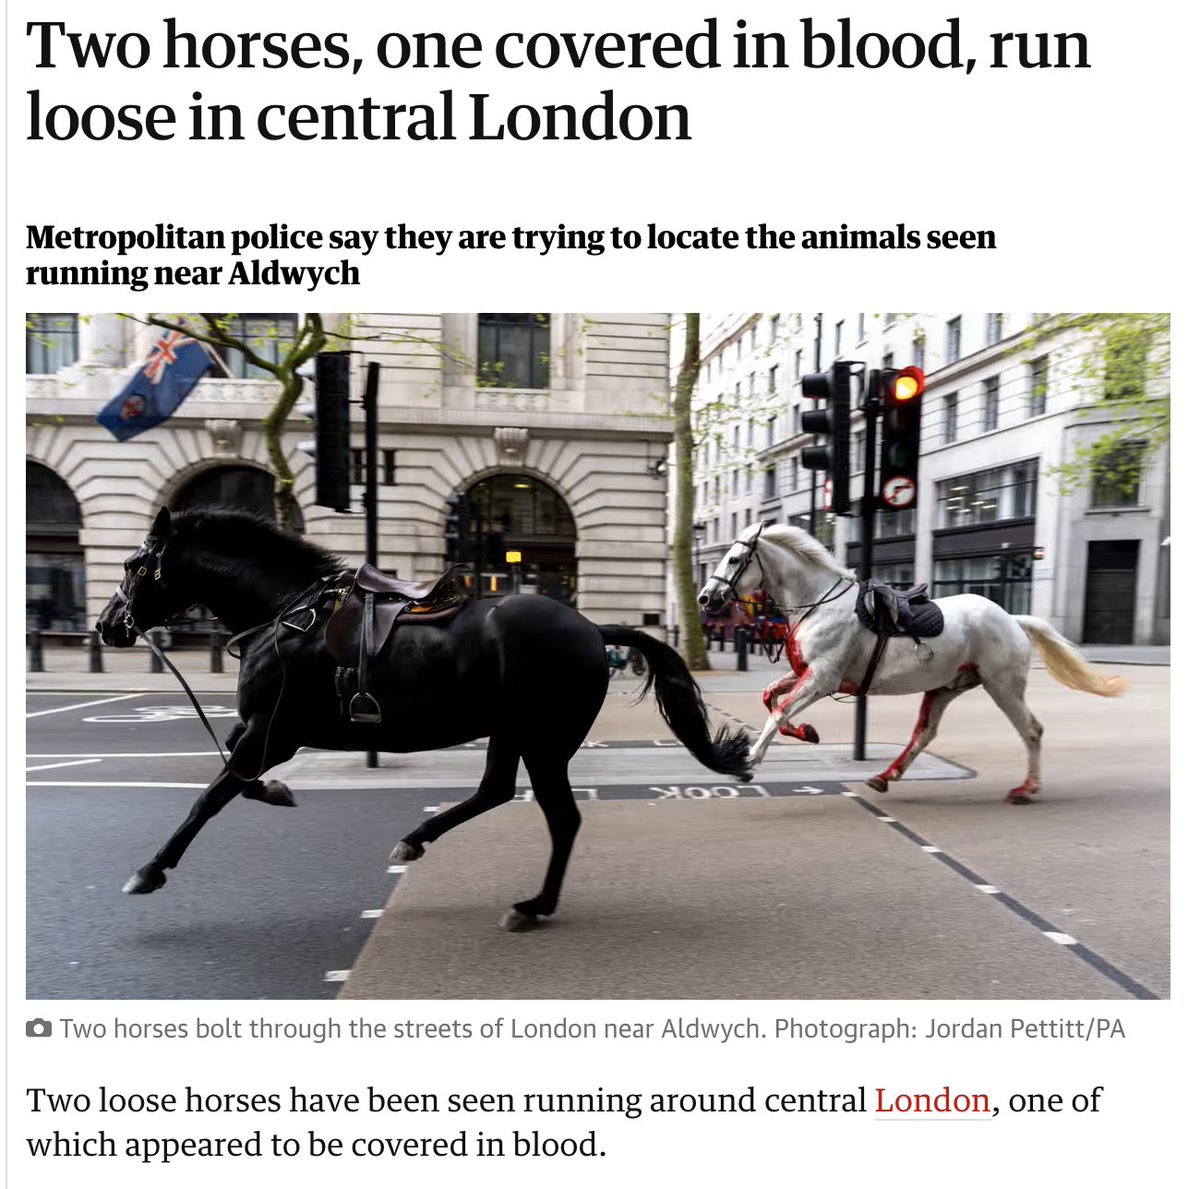 These are War and Pestilence. Death and Conquest are unavailable after fourteen years of cuts, and have been sub-contracted to SERCO who are sourcing a pair of Shetland Ponies as we speak.